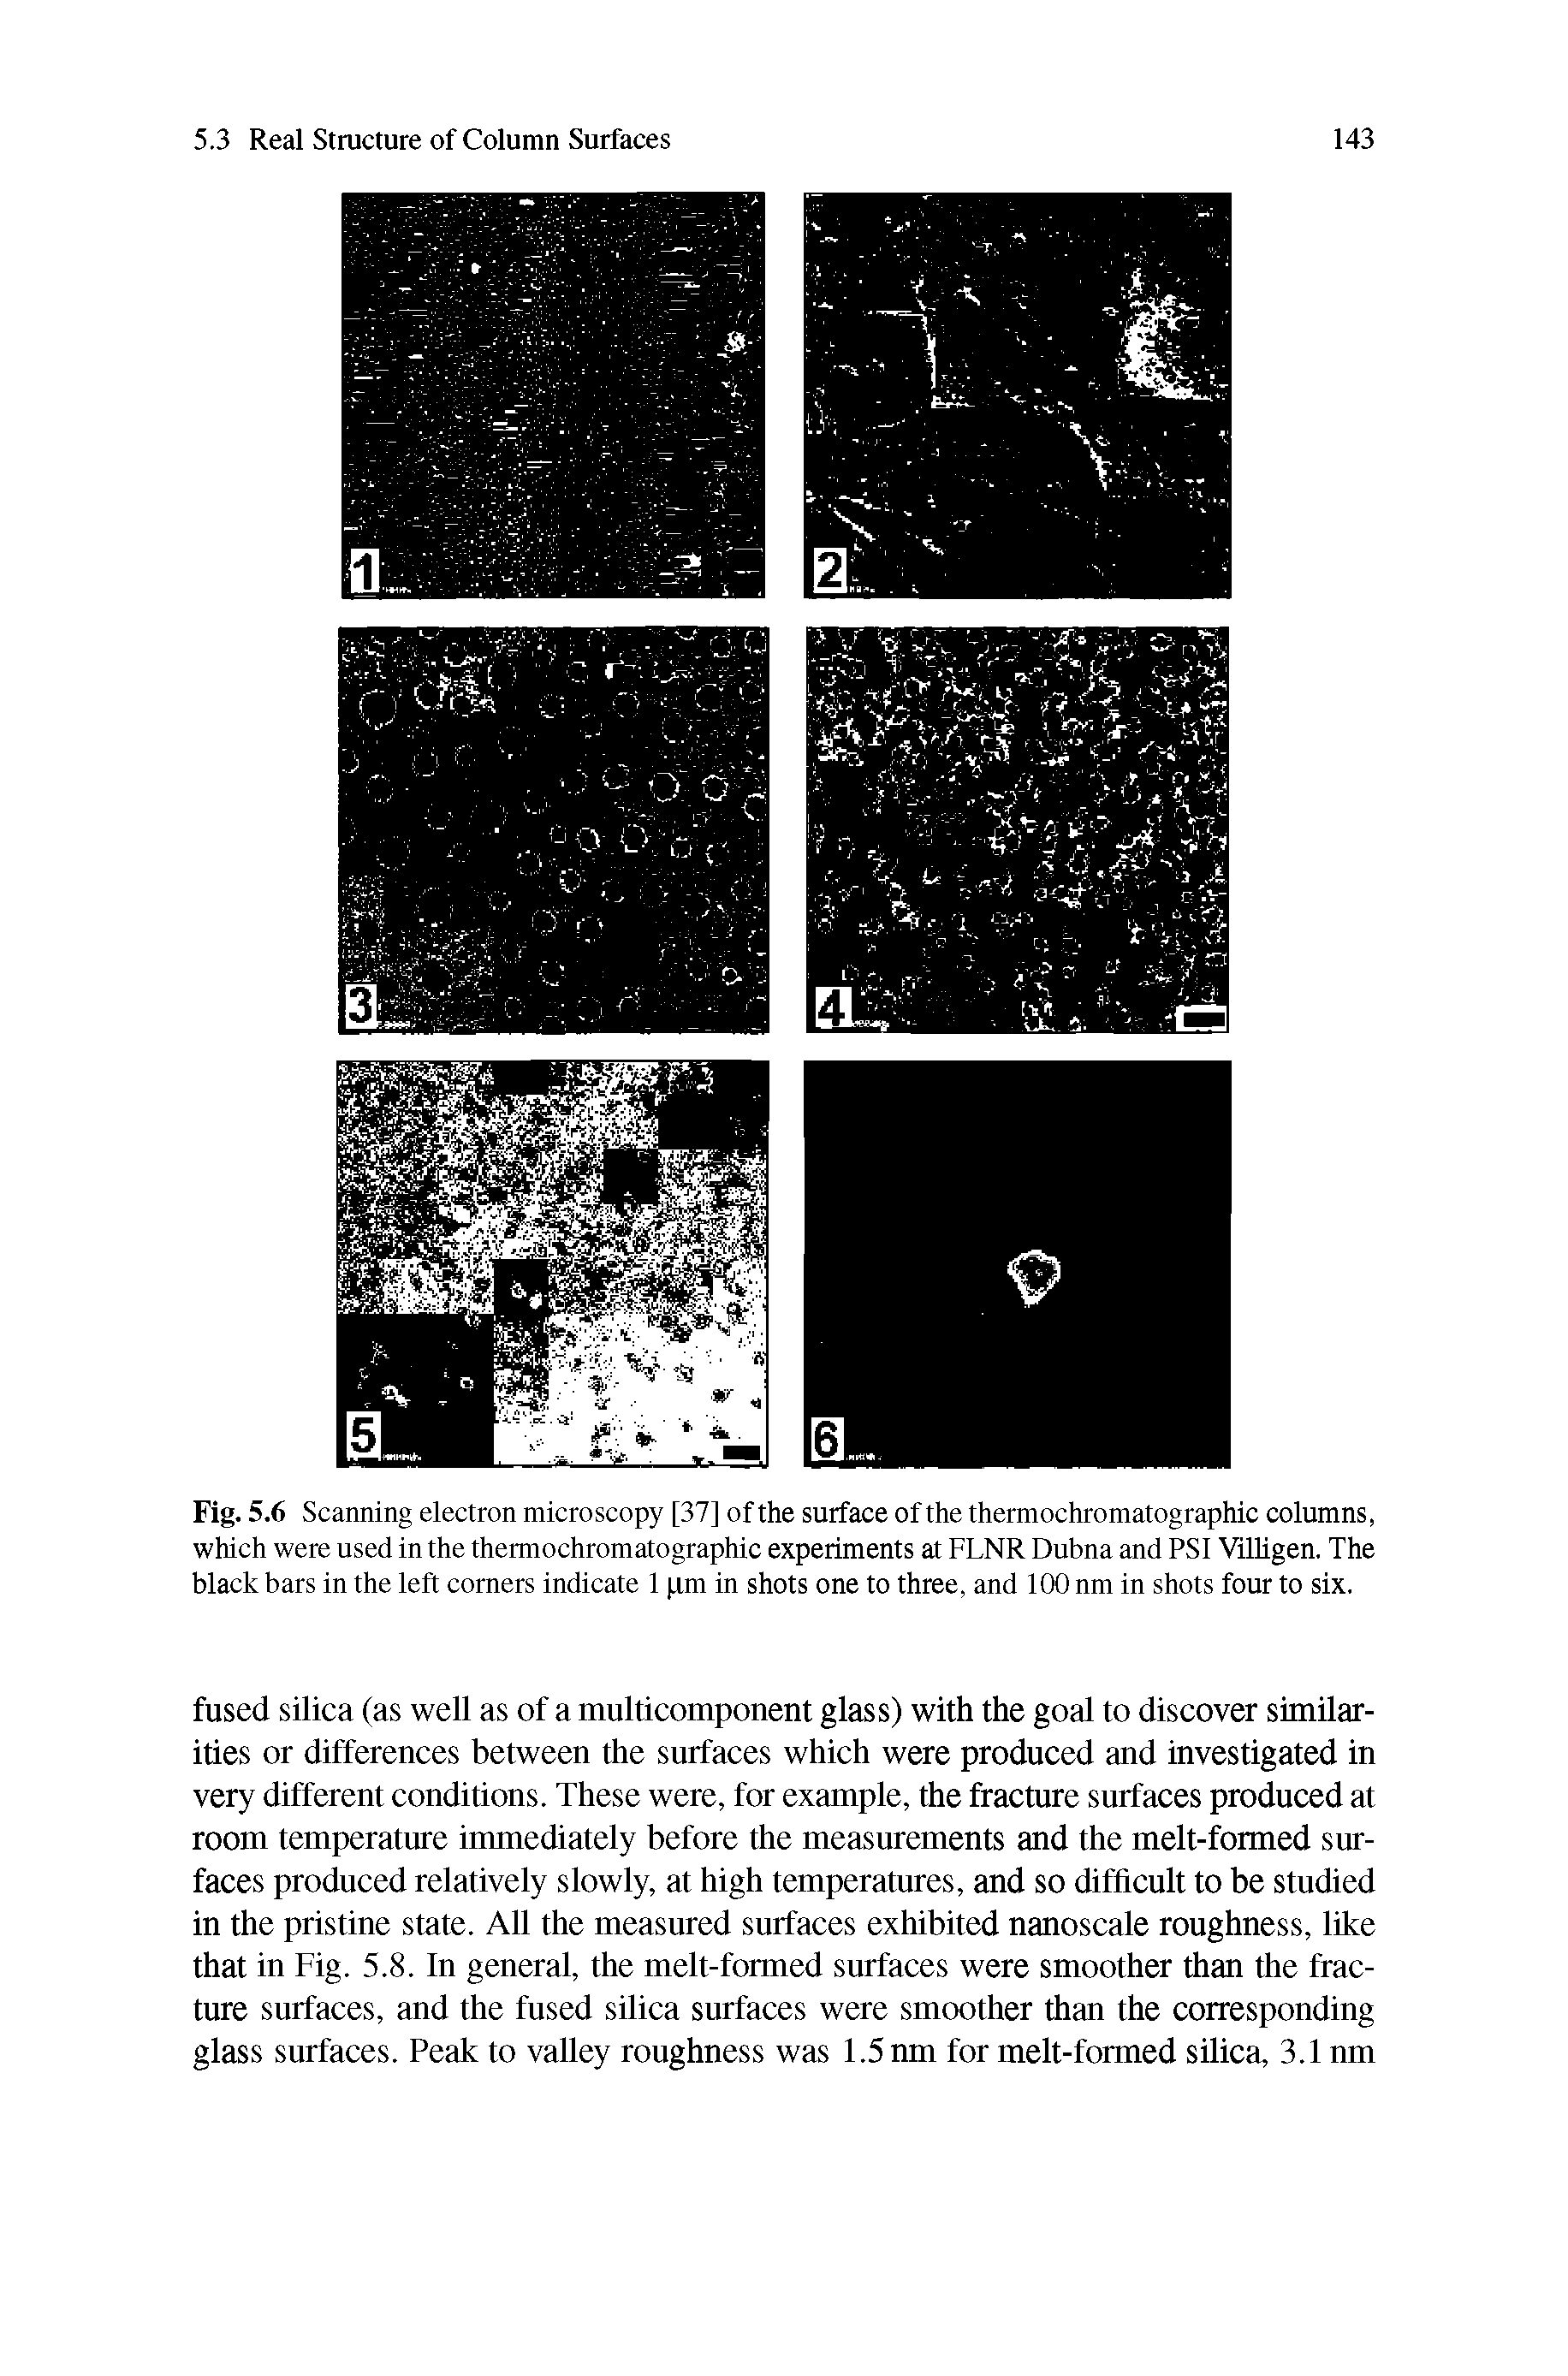 Fig. 5.6 Scanning electron microscopy [37] of the surface of the thermochromatographic columns, which were used in the thermochromatographic experiments at FLNR Dubna and PSI Villigen. The black bars in the left corners indicate 1 pm in shots one to three, and 100 nm in shots four to six.